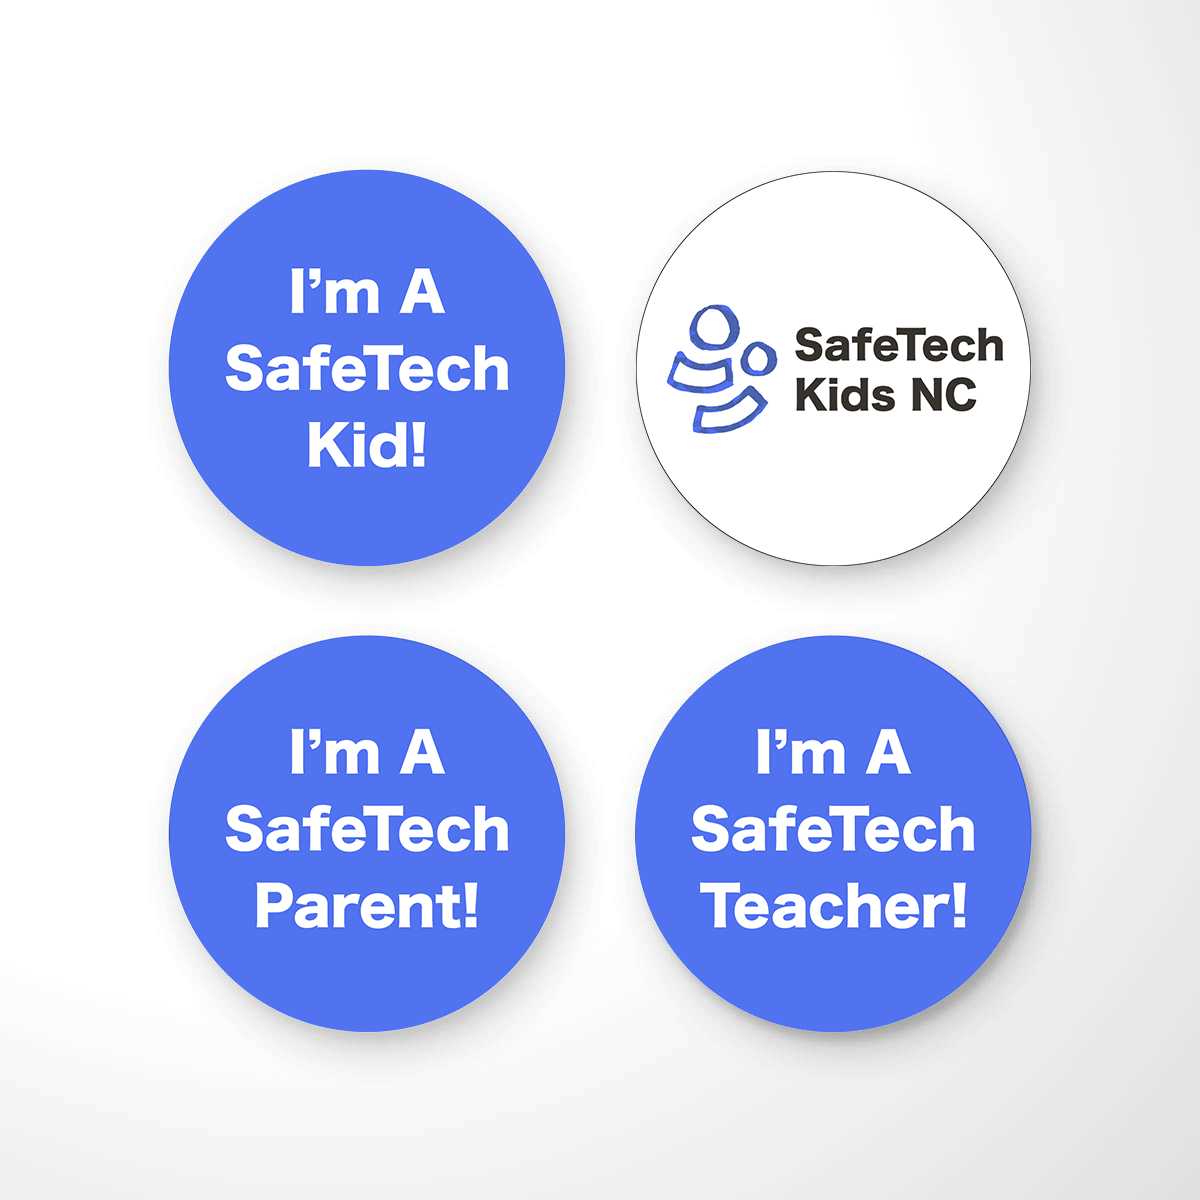 ‘I’m a SafeTech Kid, Parent, or Teacher’ campaign mocked up on stickers